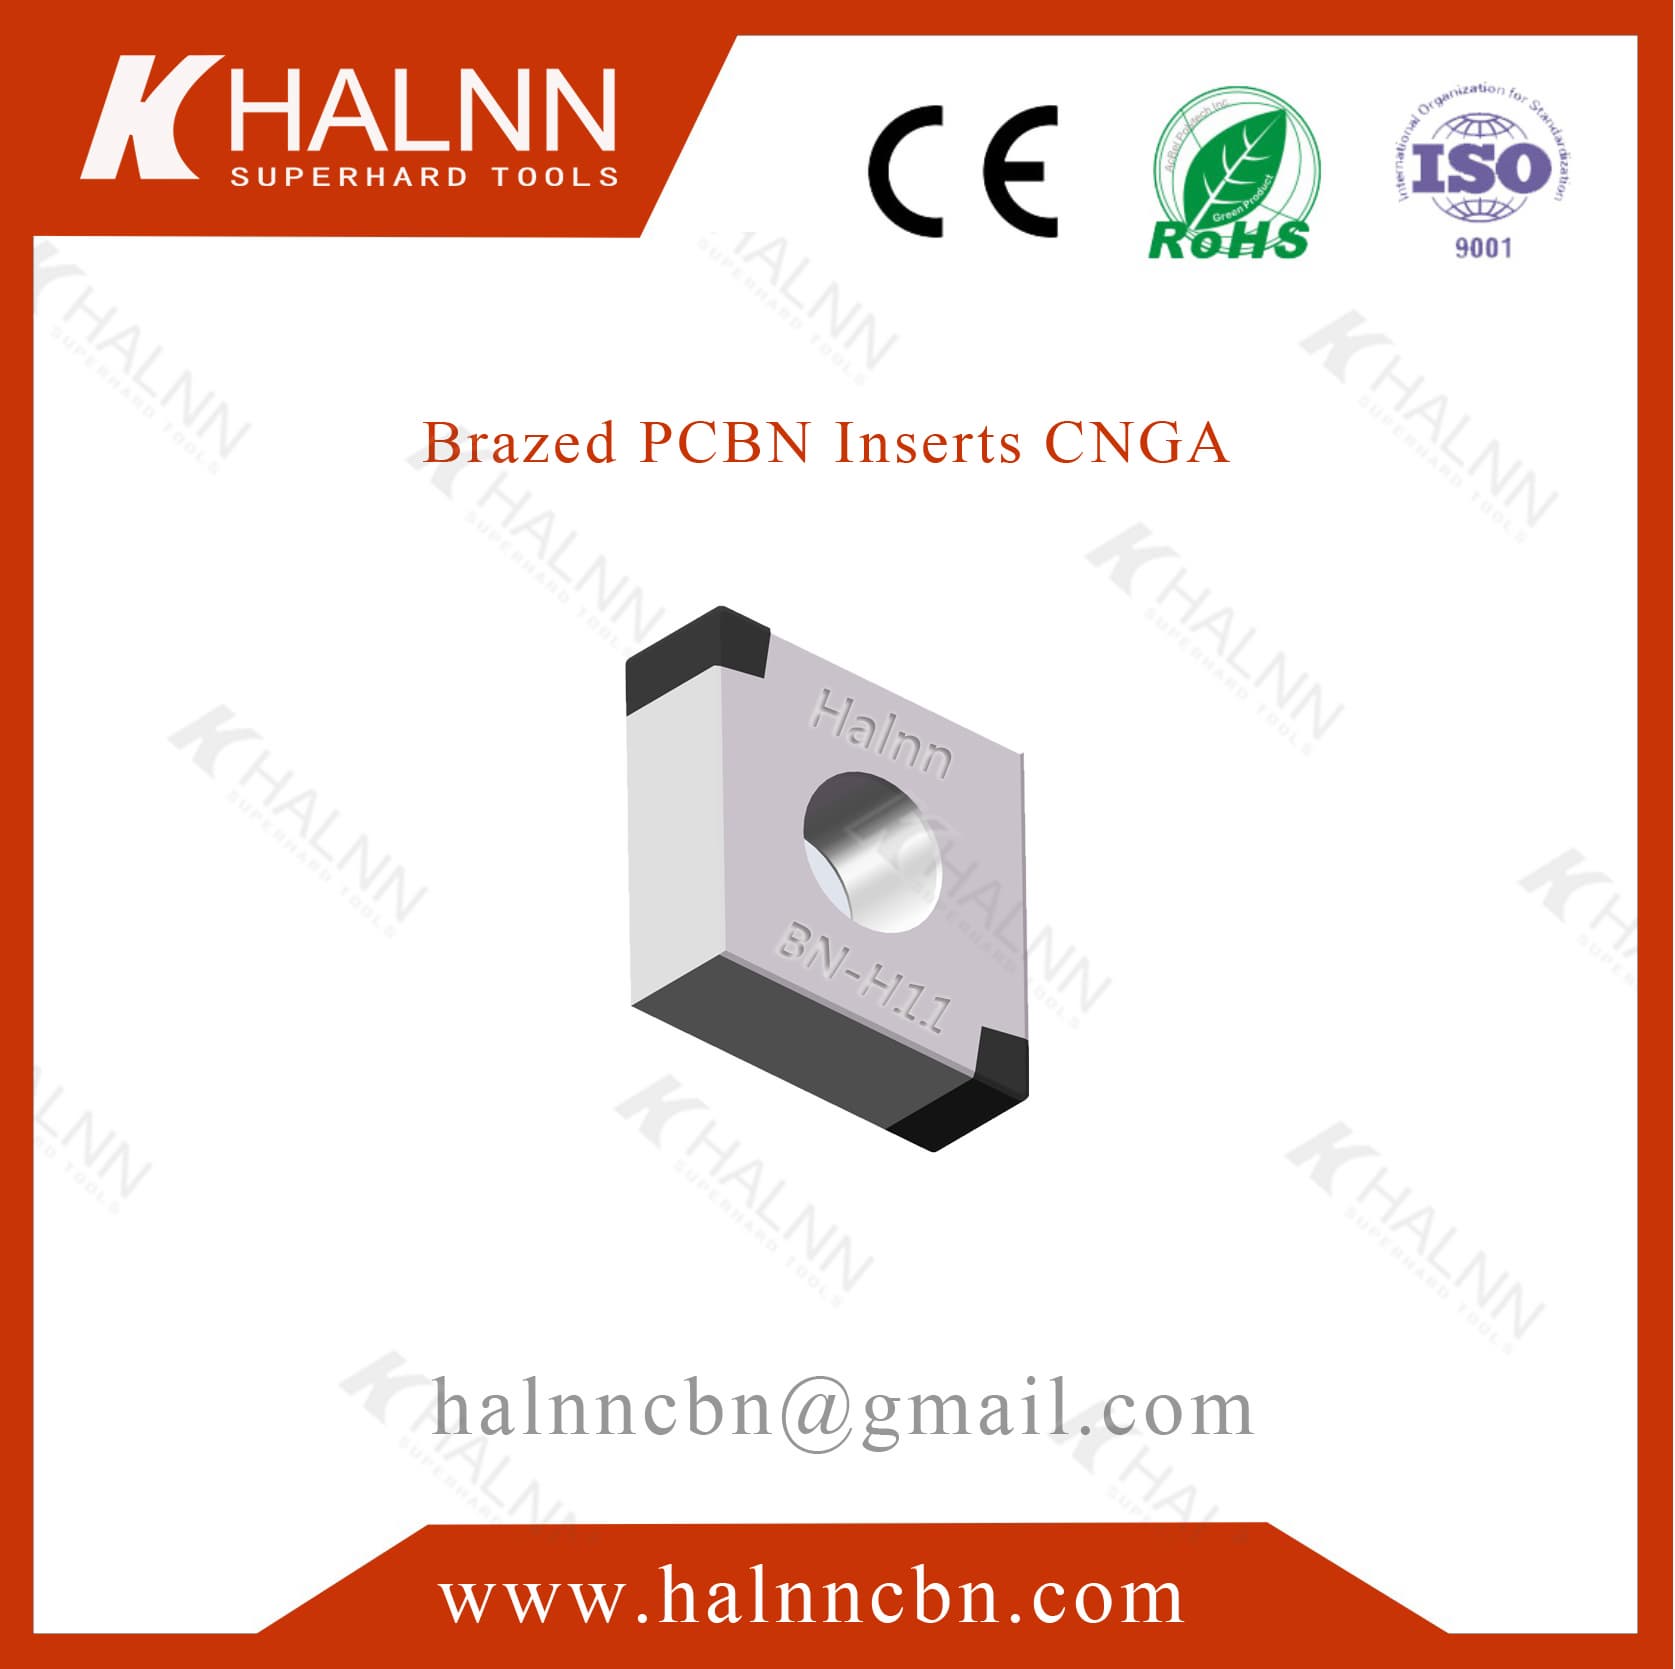 Most suitable CBN inserts for machining high hardness steel